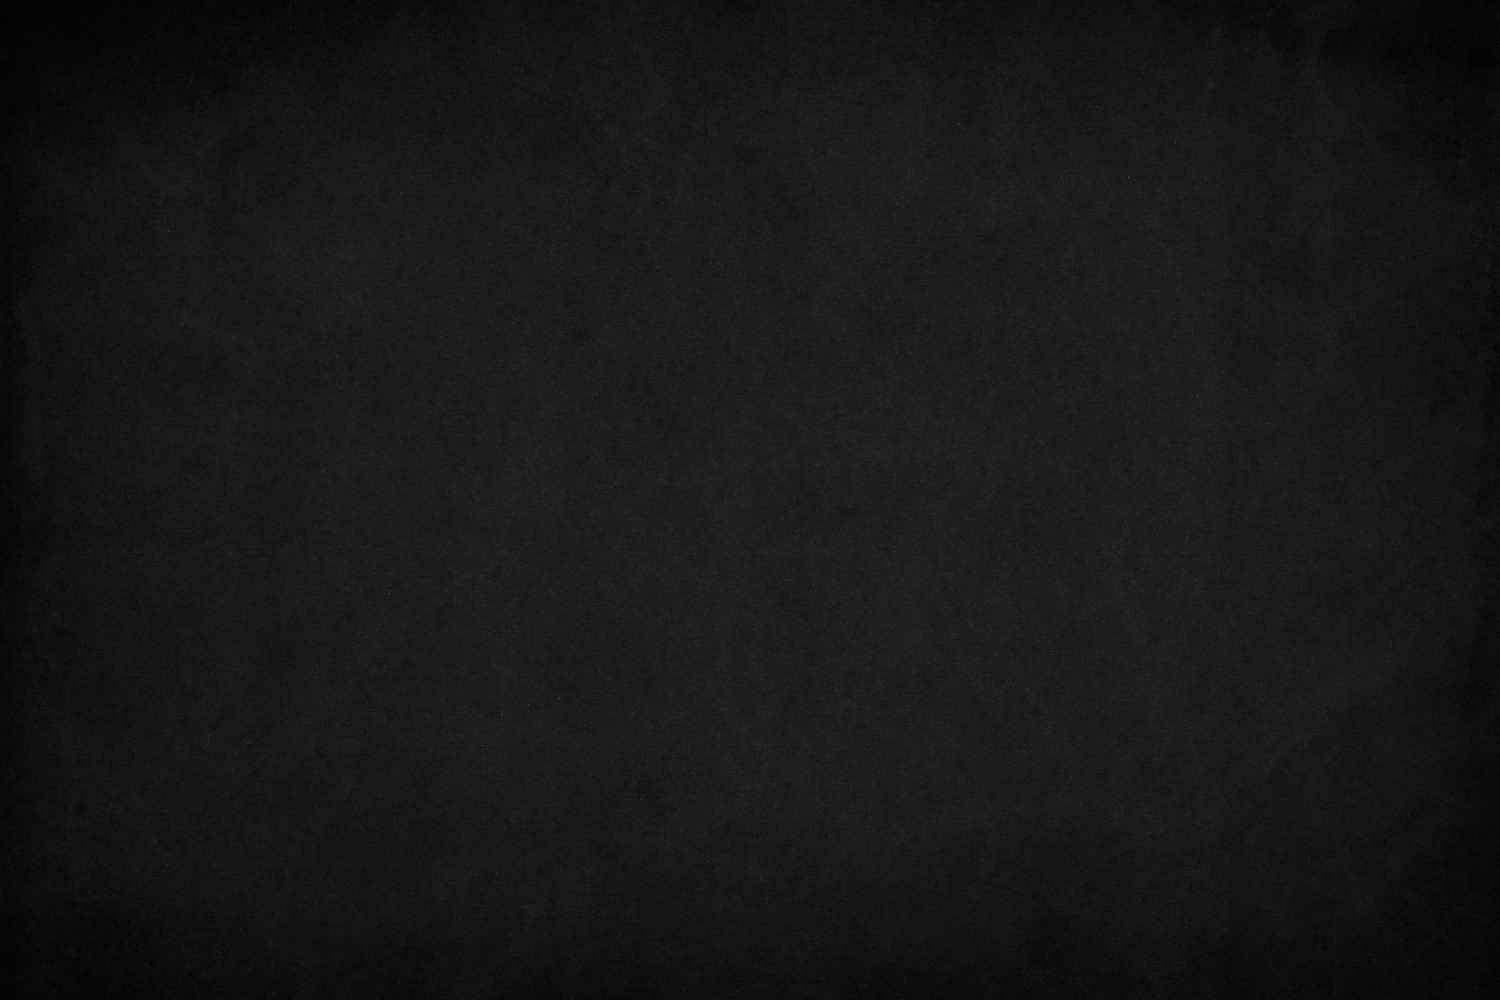 black-smooth-textured-paper-background